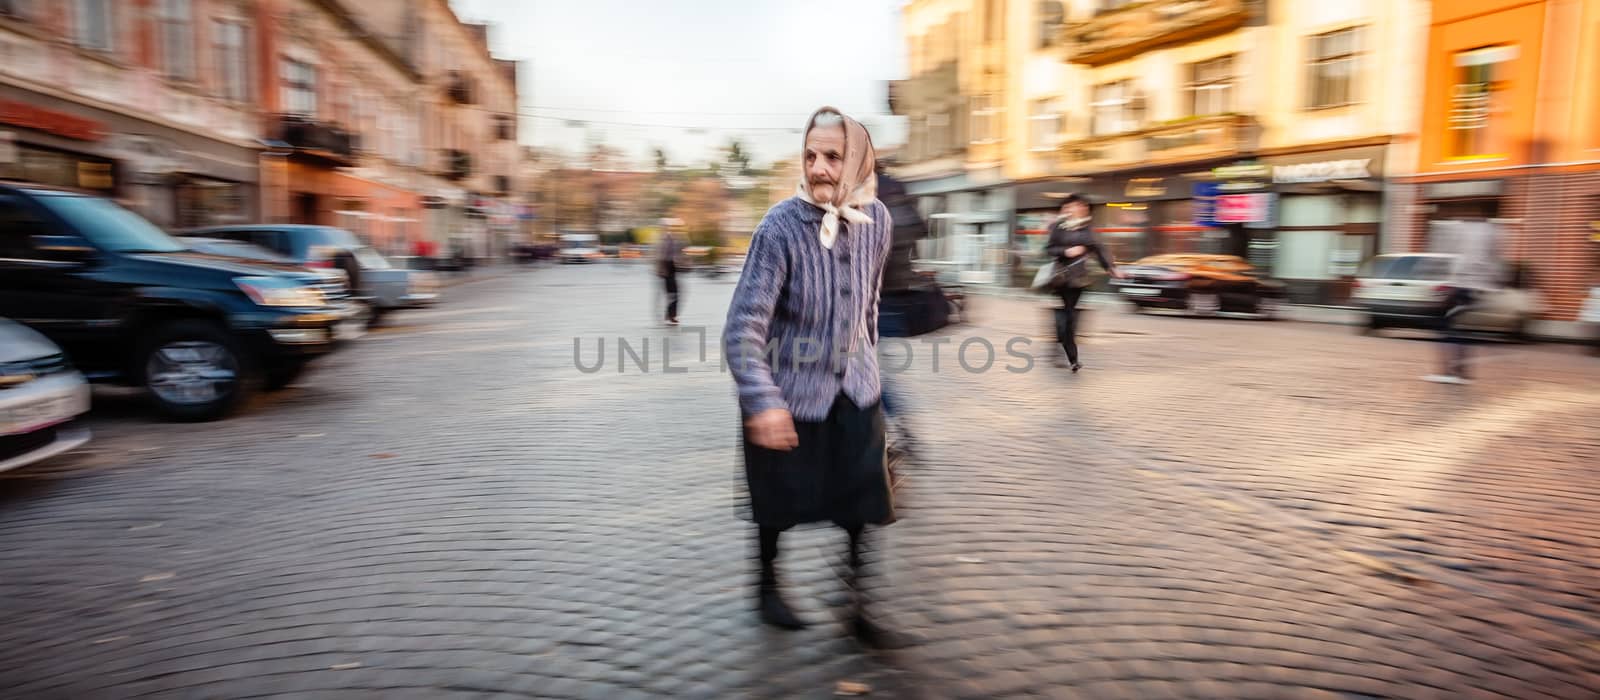  Old woman goes on her way in the early morning city by palinchak